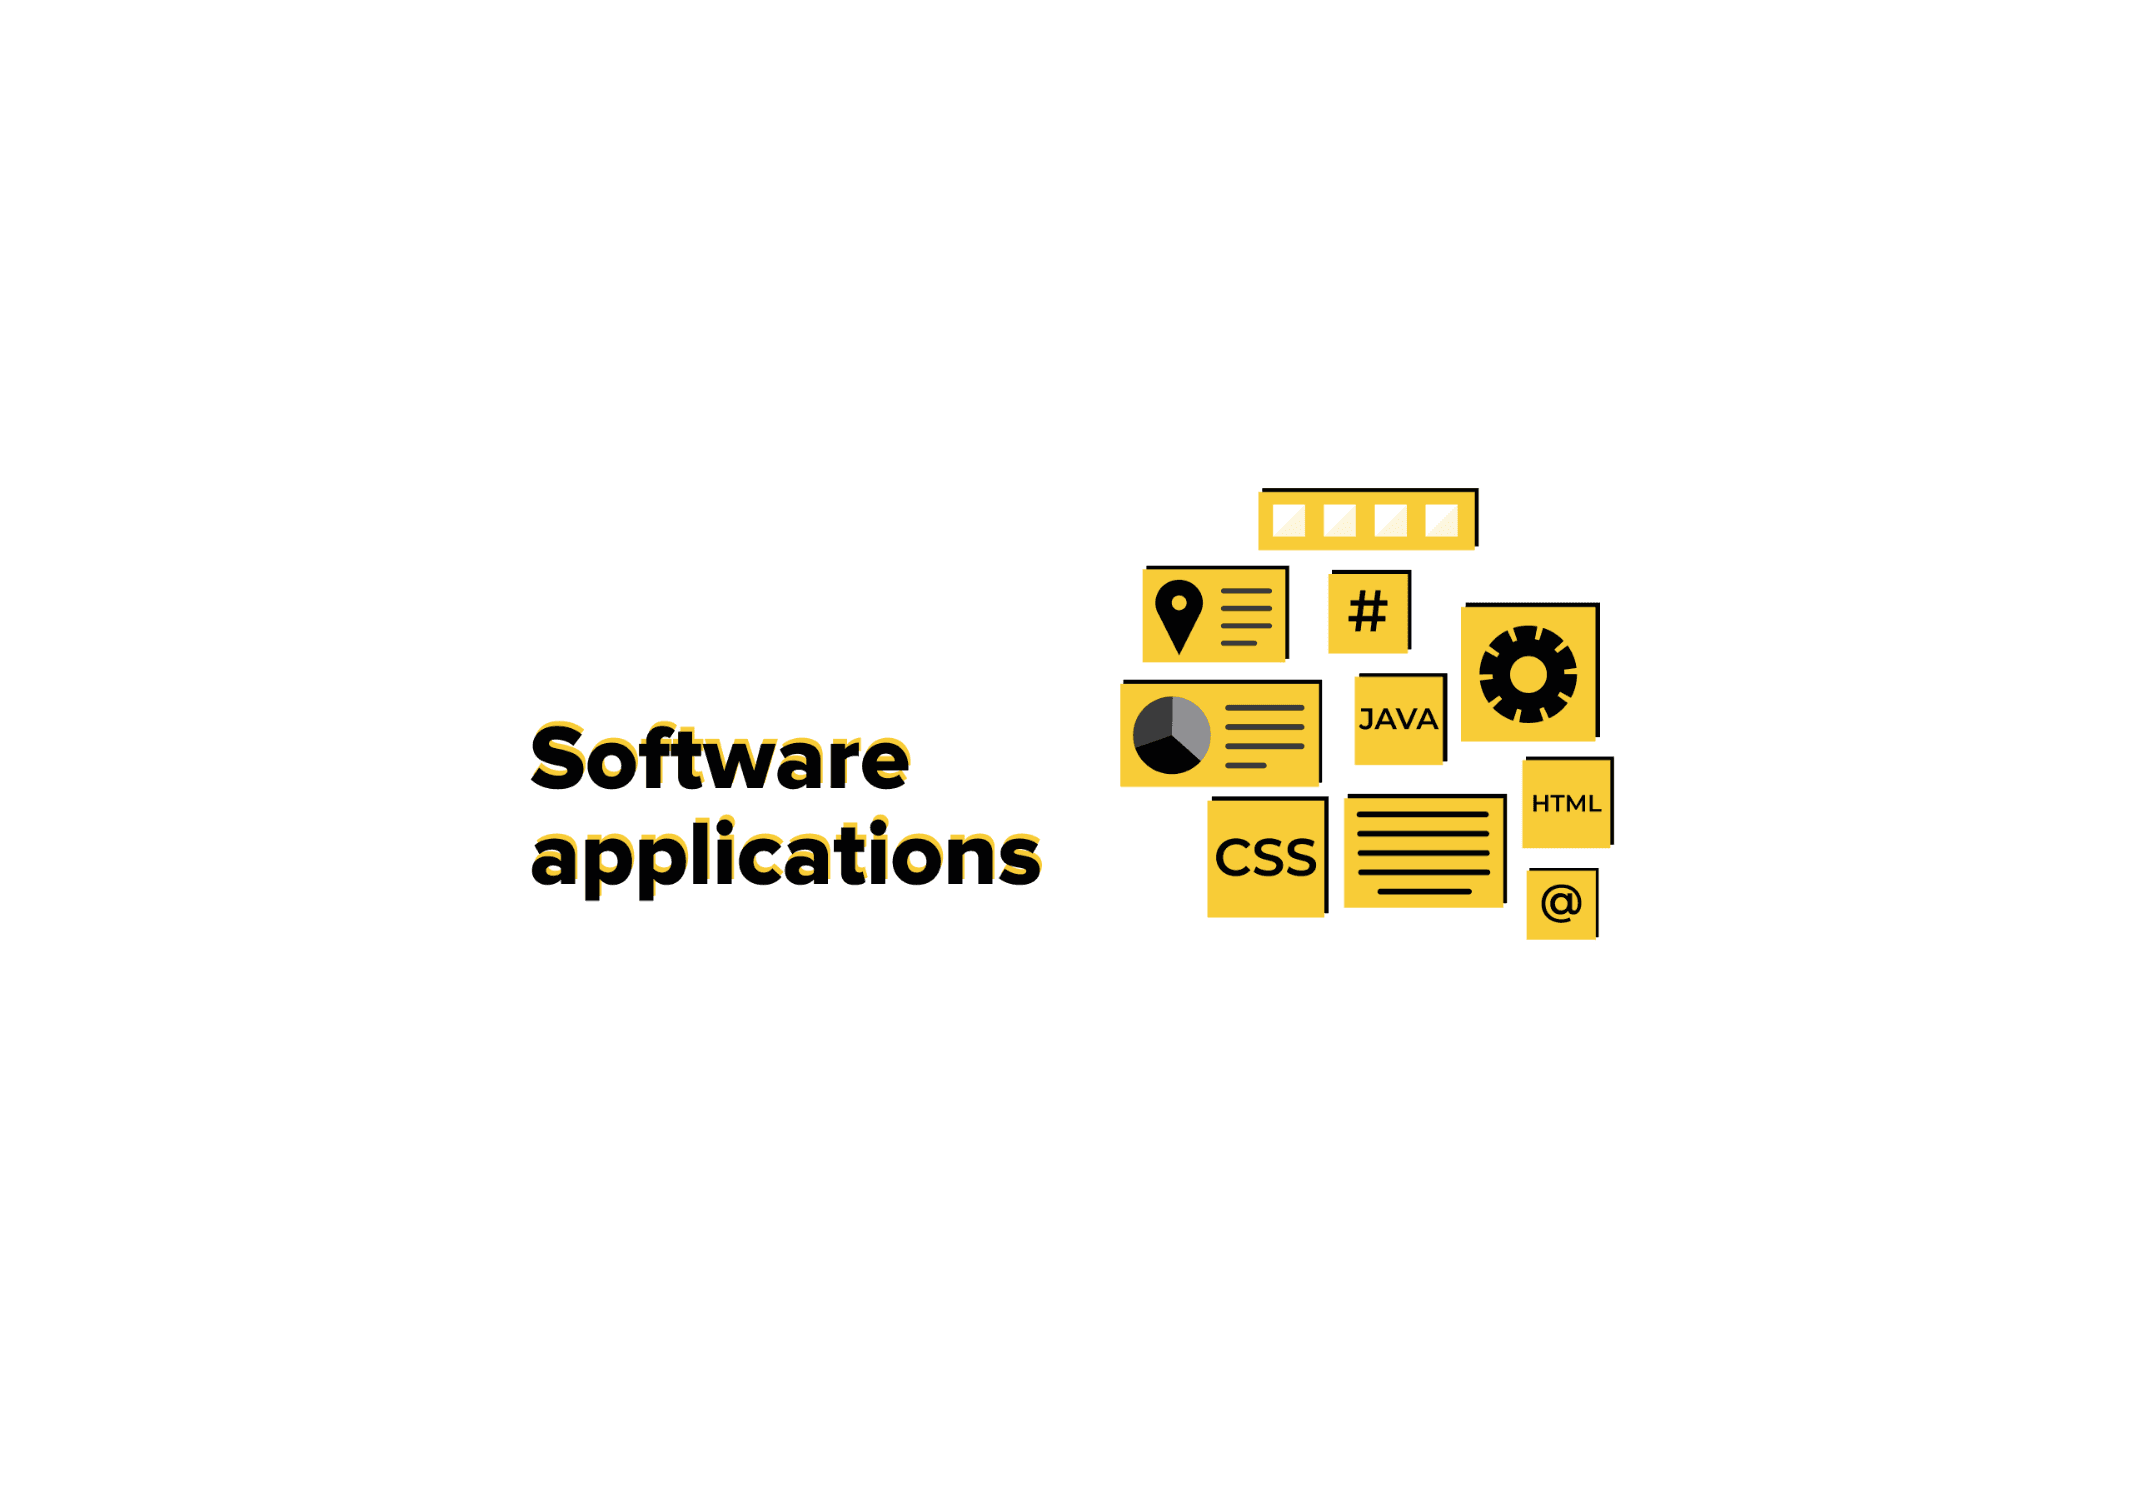 List of application software